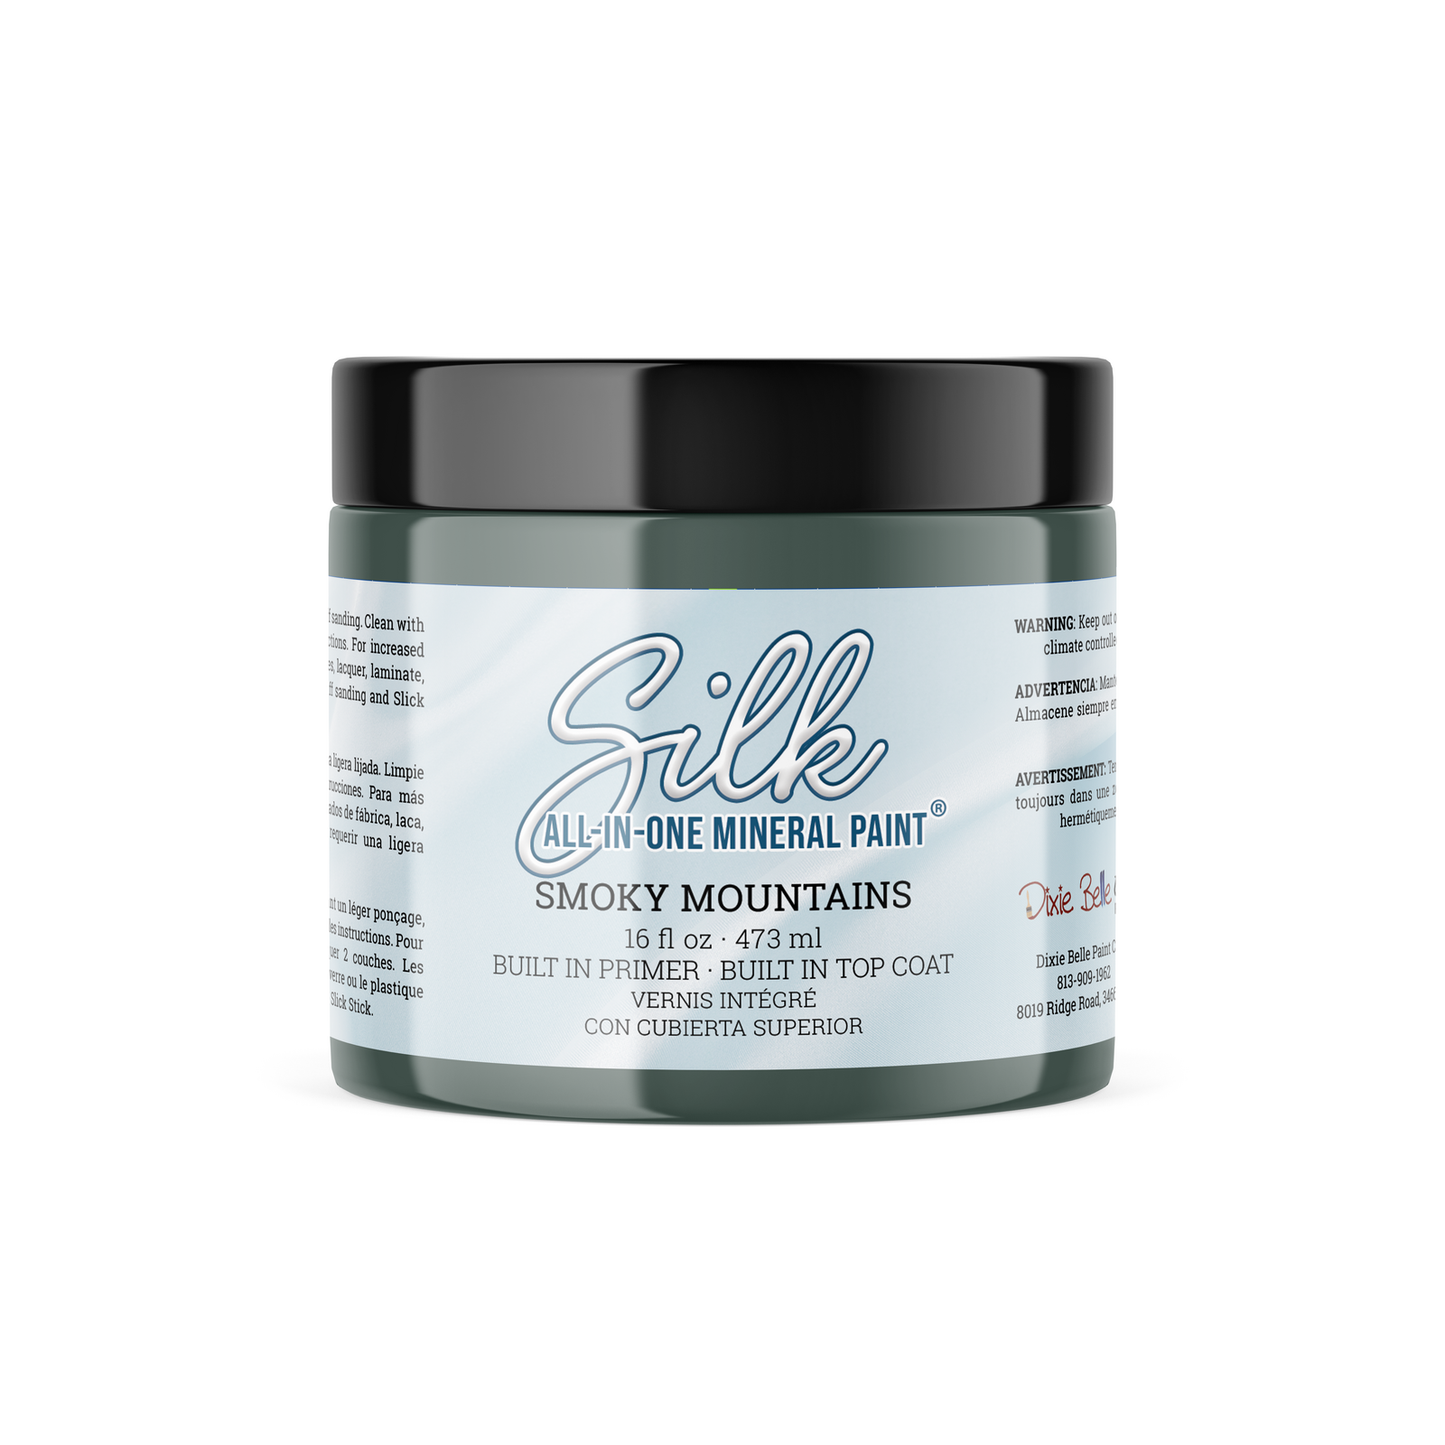 Smoky Mountains - SILK All-in-one Mineral Paint